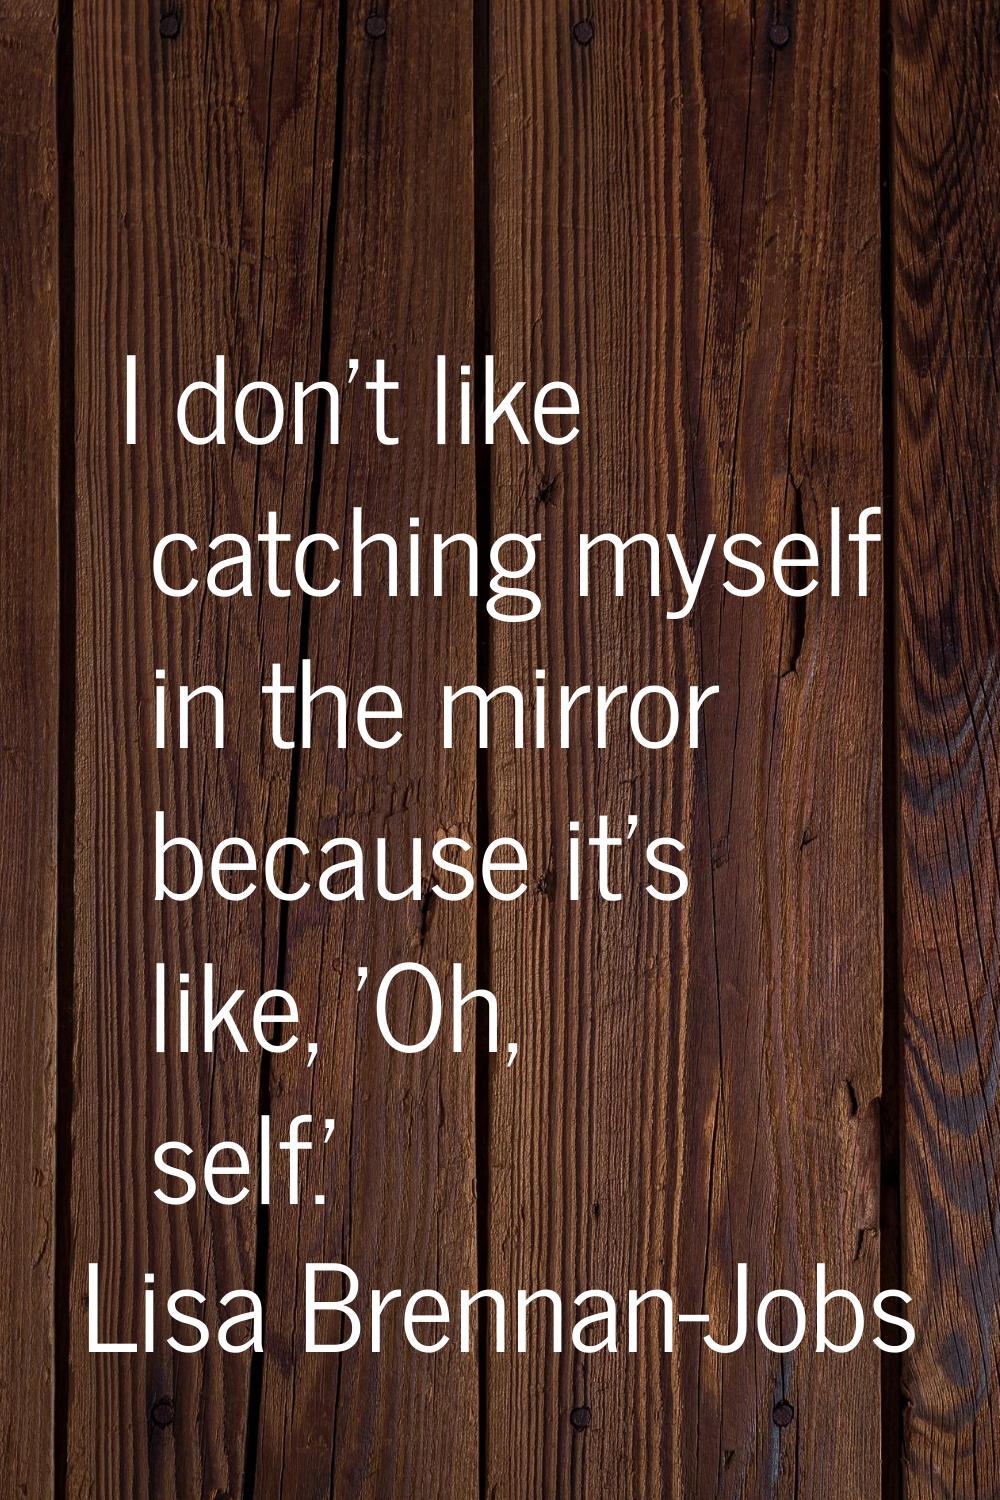 I don't like catching myself in the mirror because it's like, 'Oh, self.'